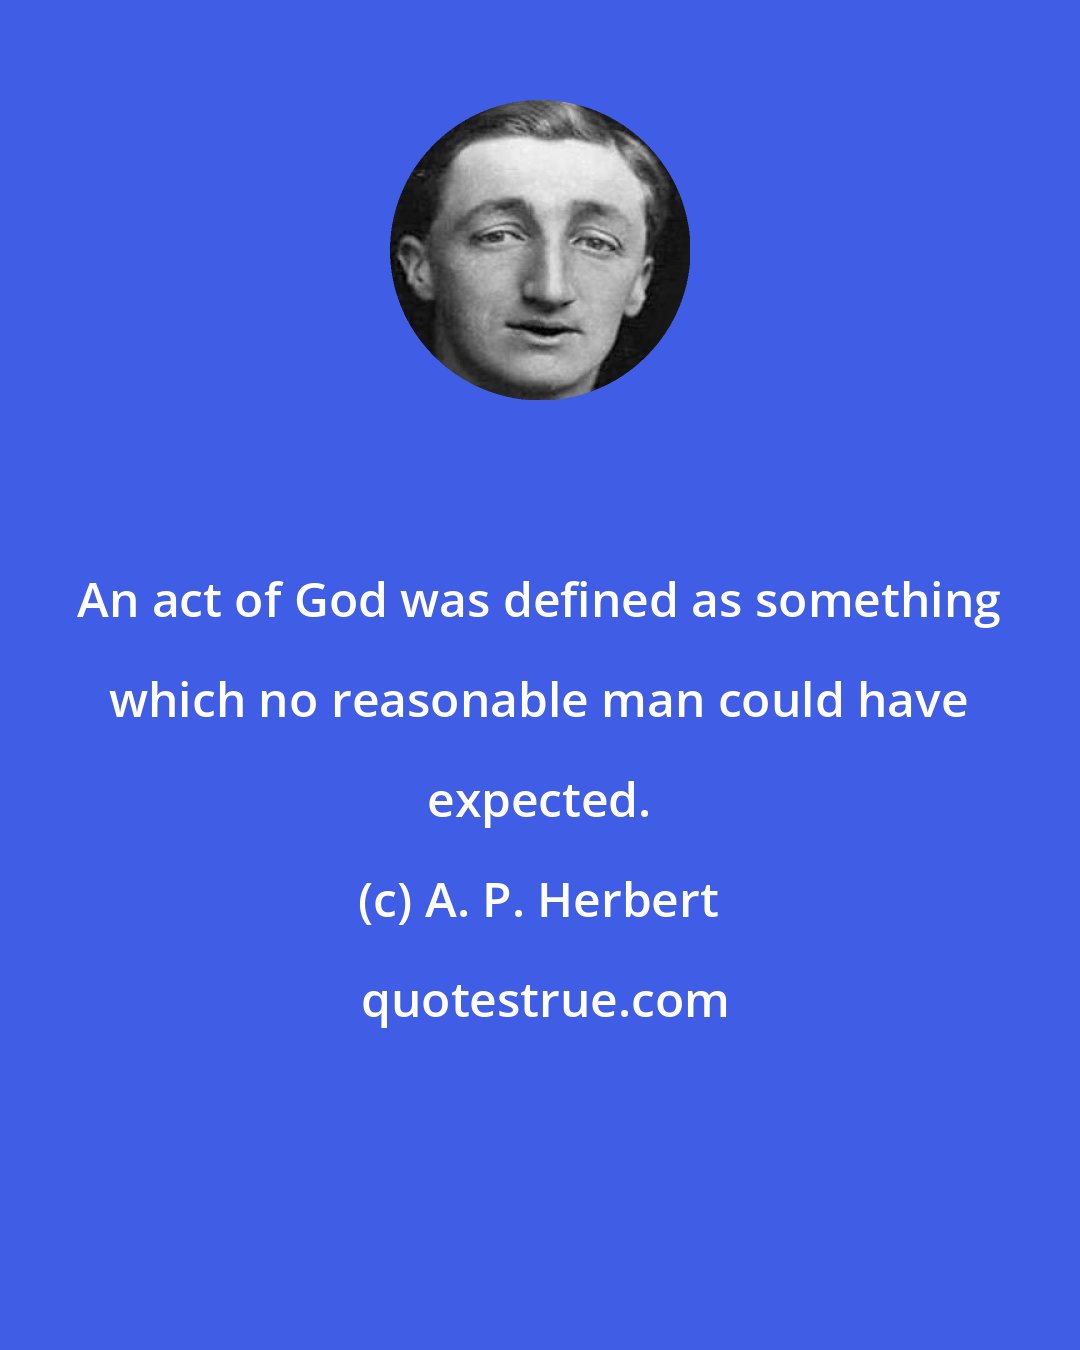 A. P. Herbert: An act of God was defined as something which no reasonable man could have expected.